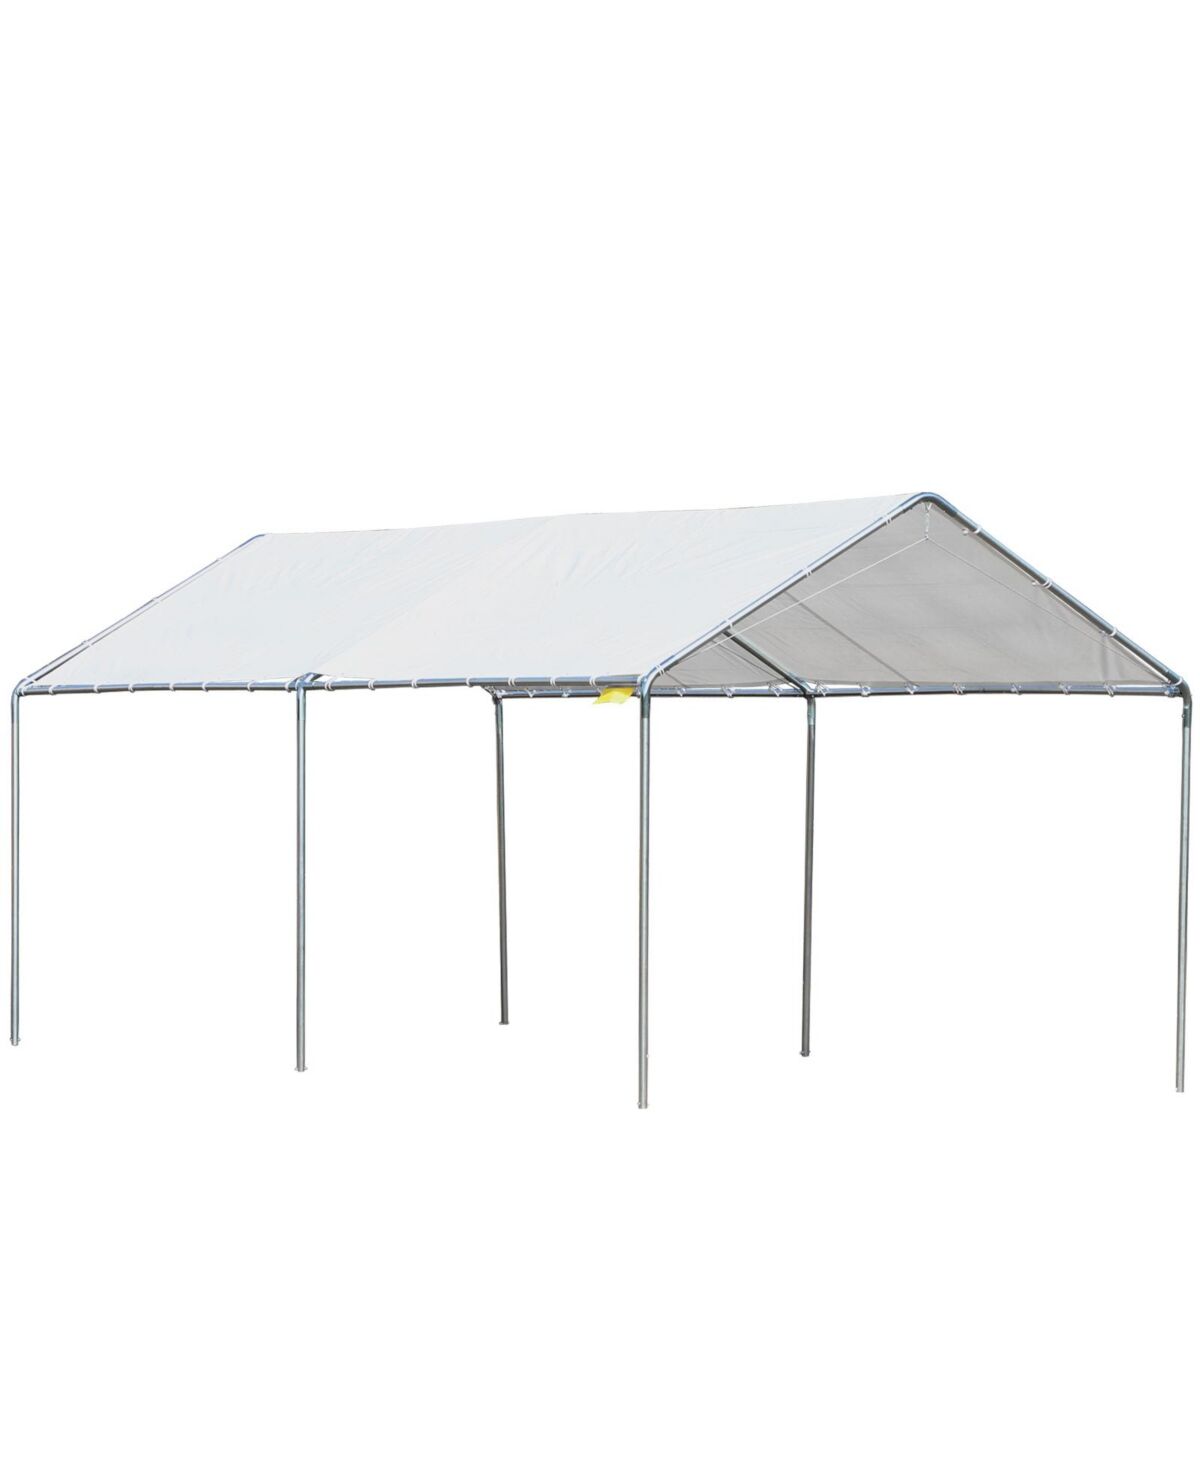 Outsunny 10'x20' Carport Heavy Duty Galvanized Car Canopy with Included Anchor Kit, 3 Reinforced Steel Cables, White - White